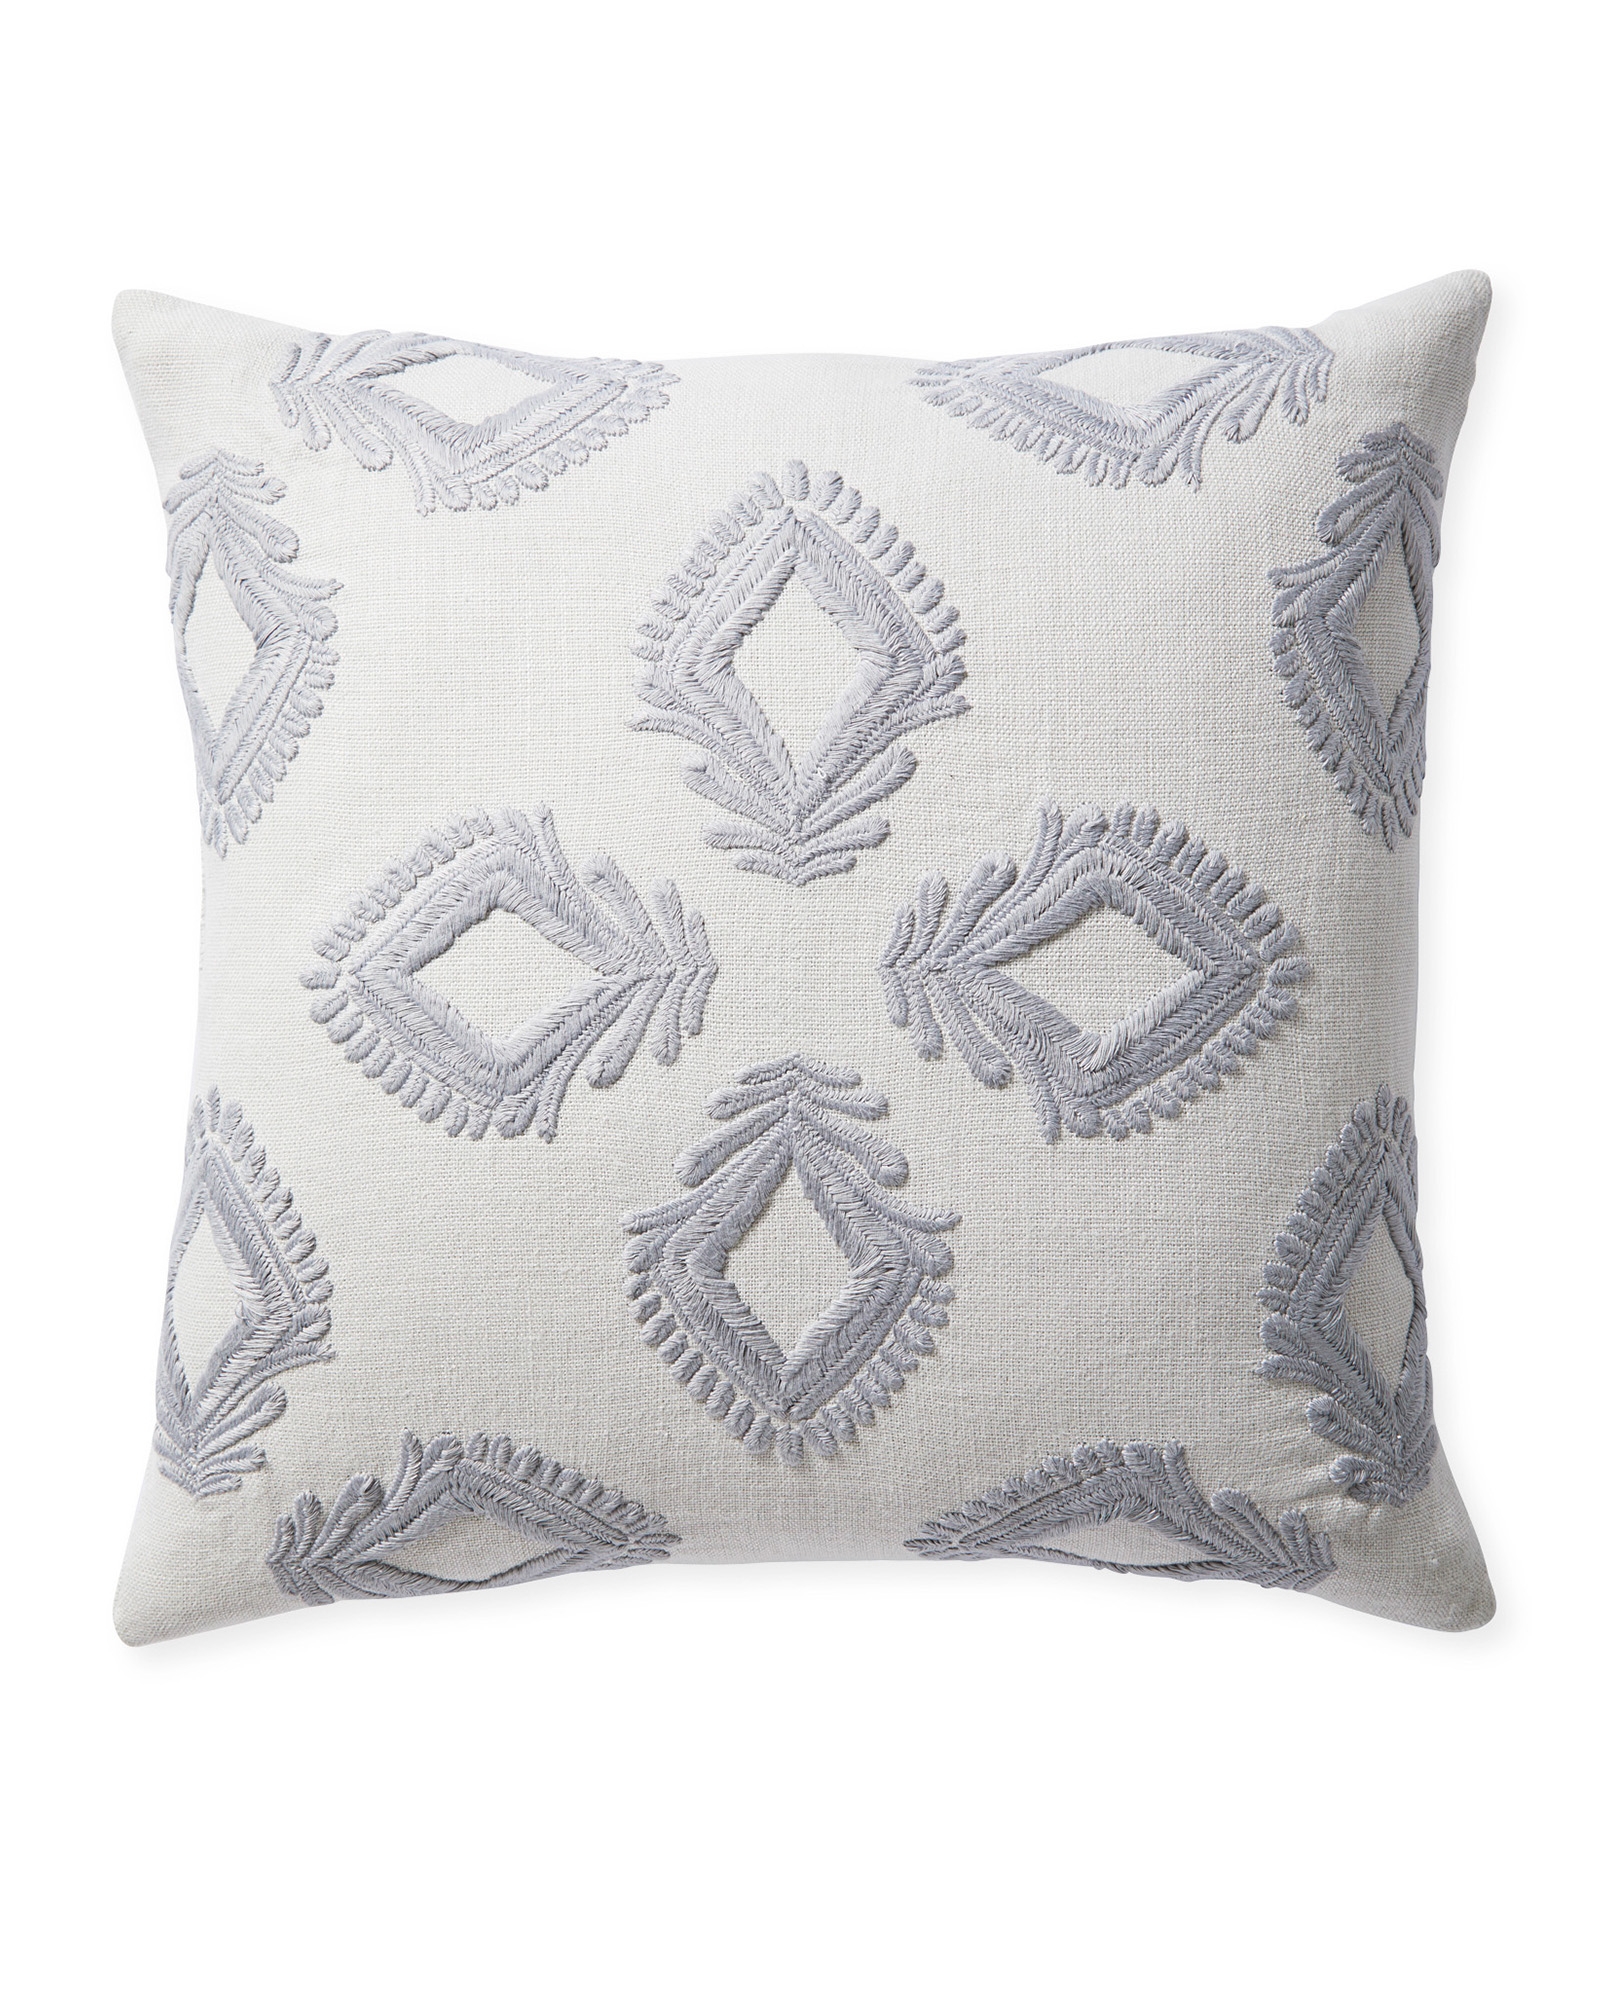 Leighton Pillow Cover - White - 24" x 24"- Insert sold separately - Image 0